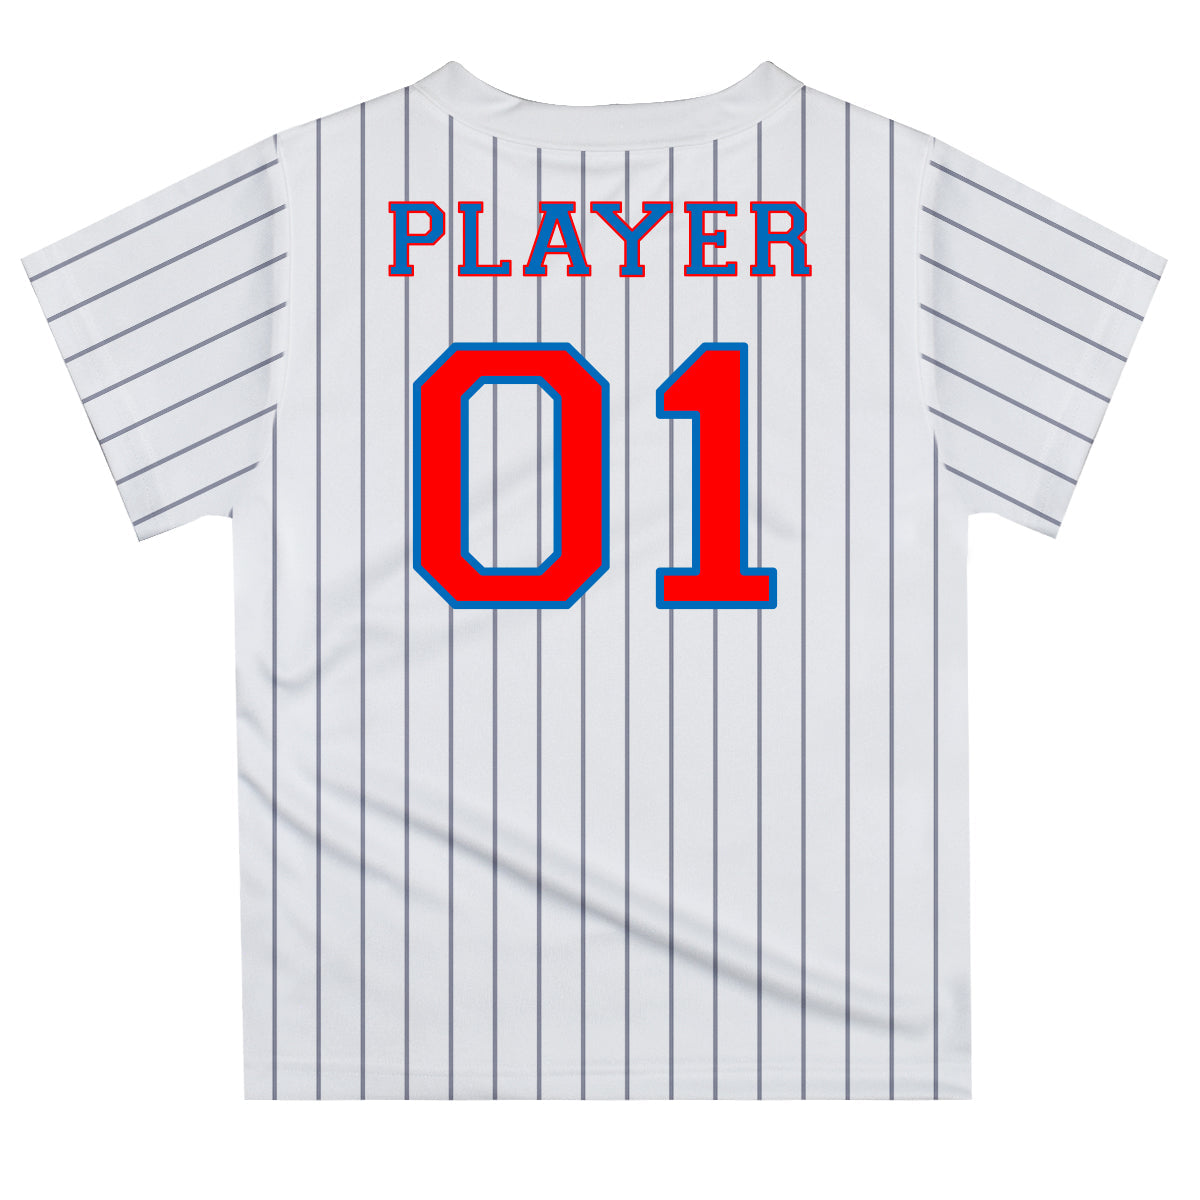 Baseball Personalized Name and Number White Gray Stripes Short Sleeve Tee Shirt - Wimziy&Co.